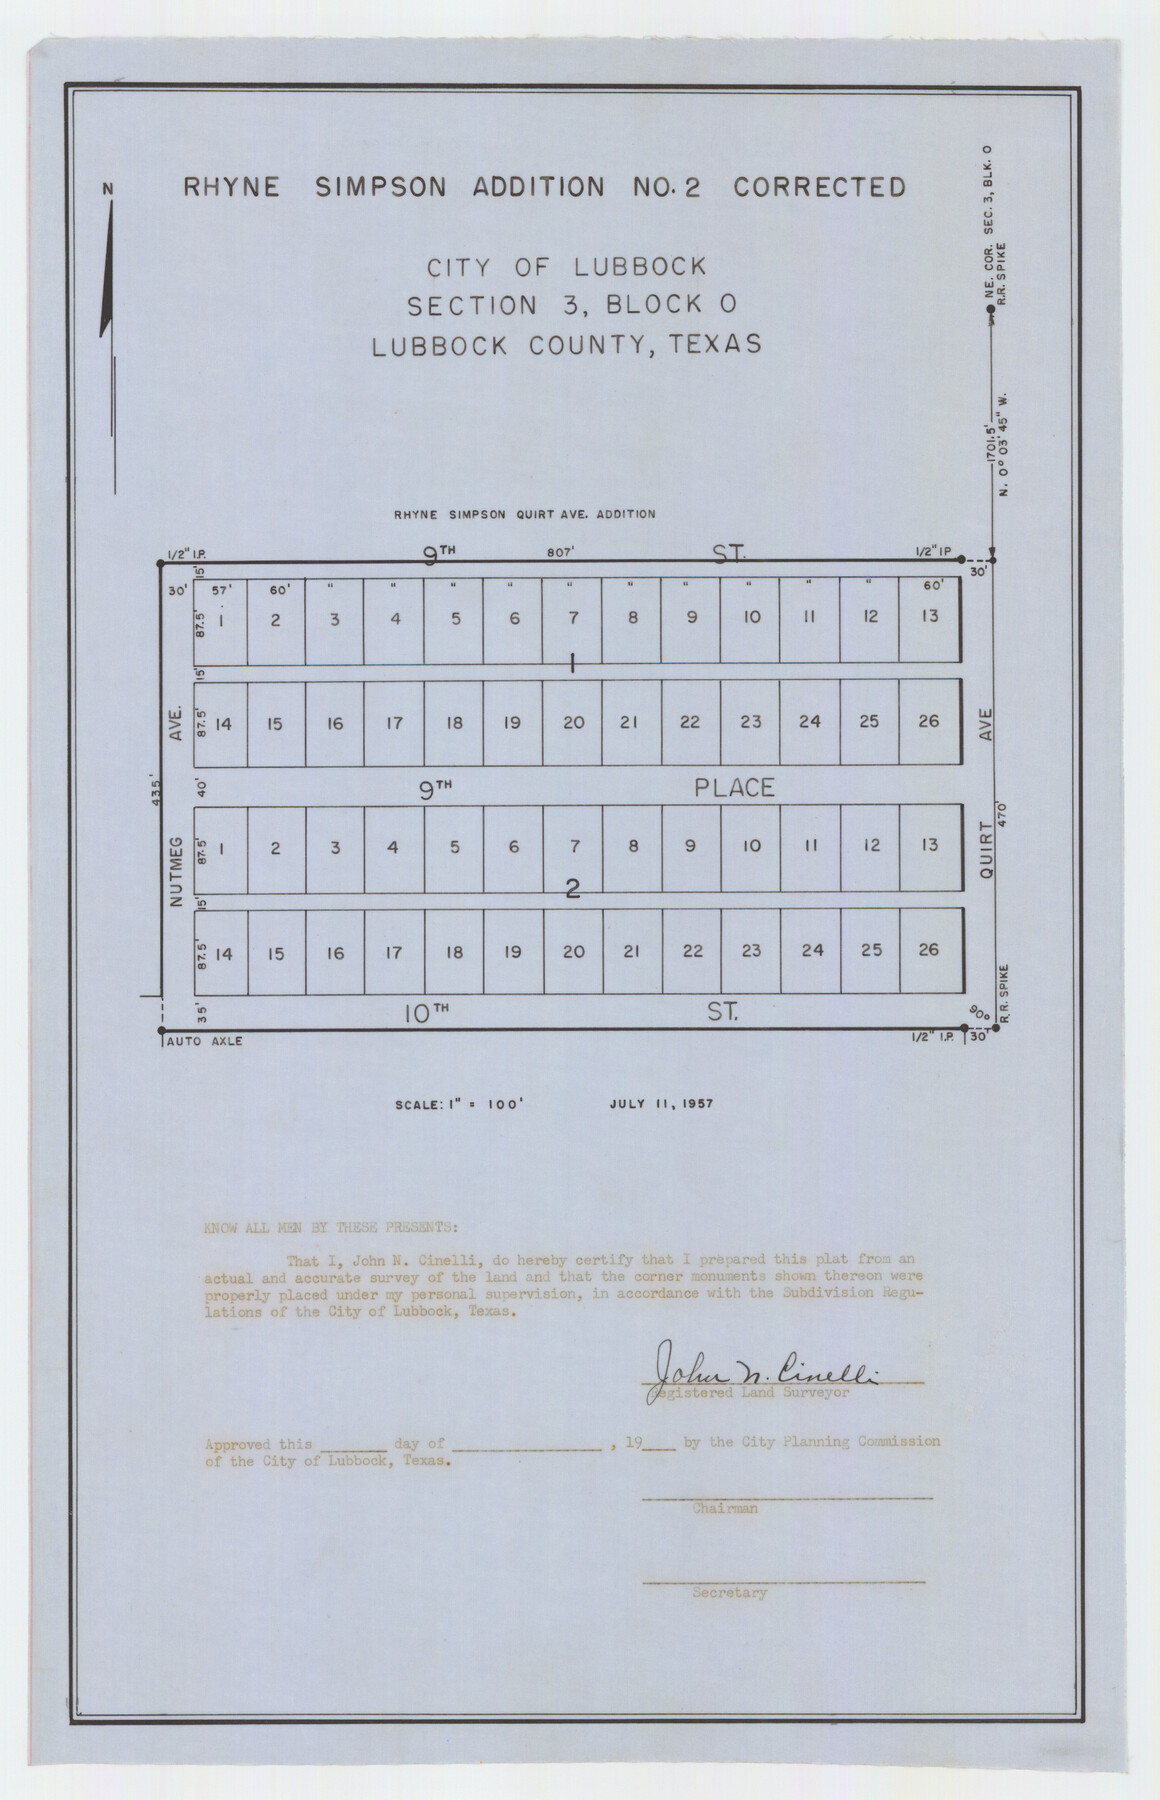 92752, Rhyne Simpson Addition No. 2, City of Lubbock Section 3, Block O, Twichell Survey Records